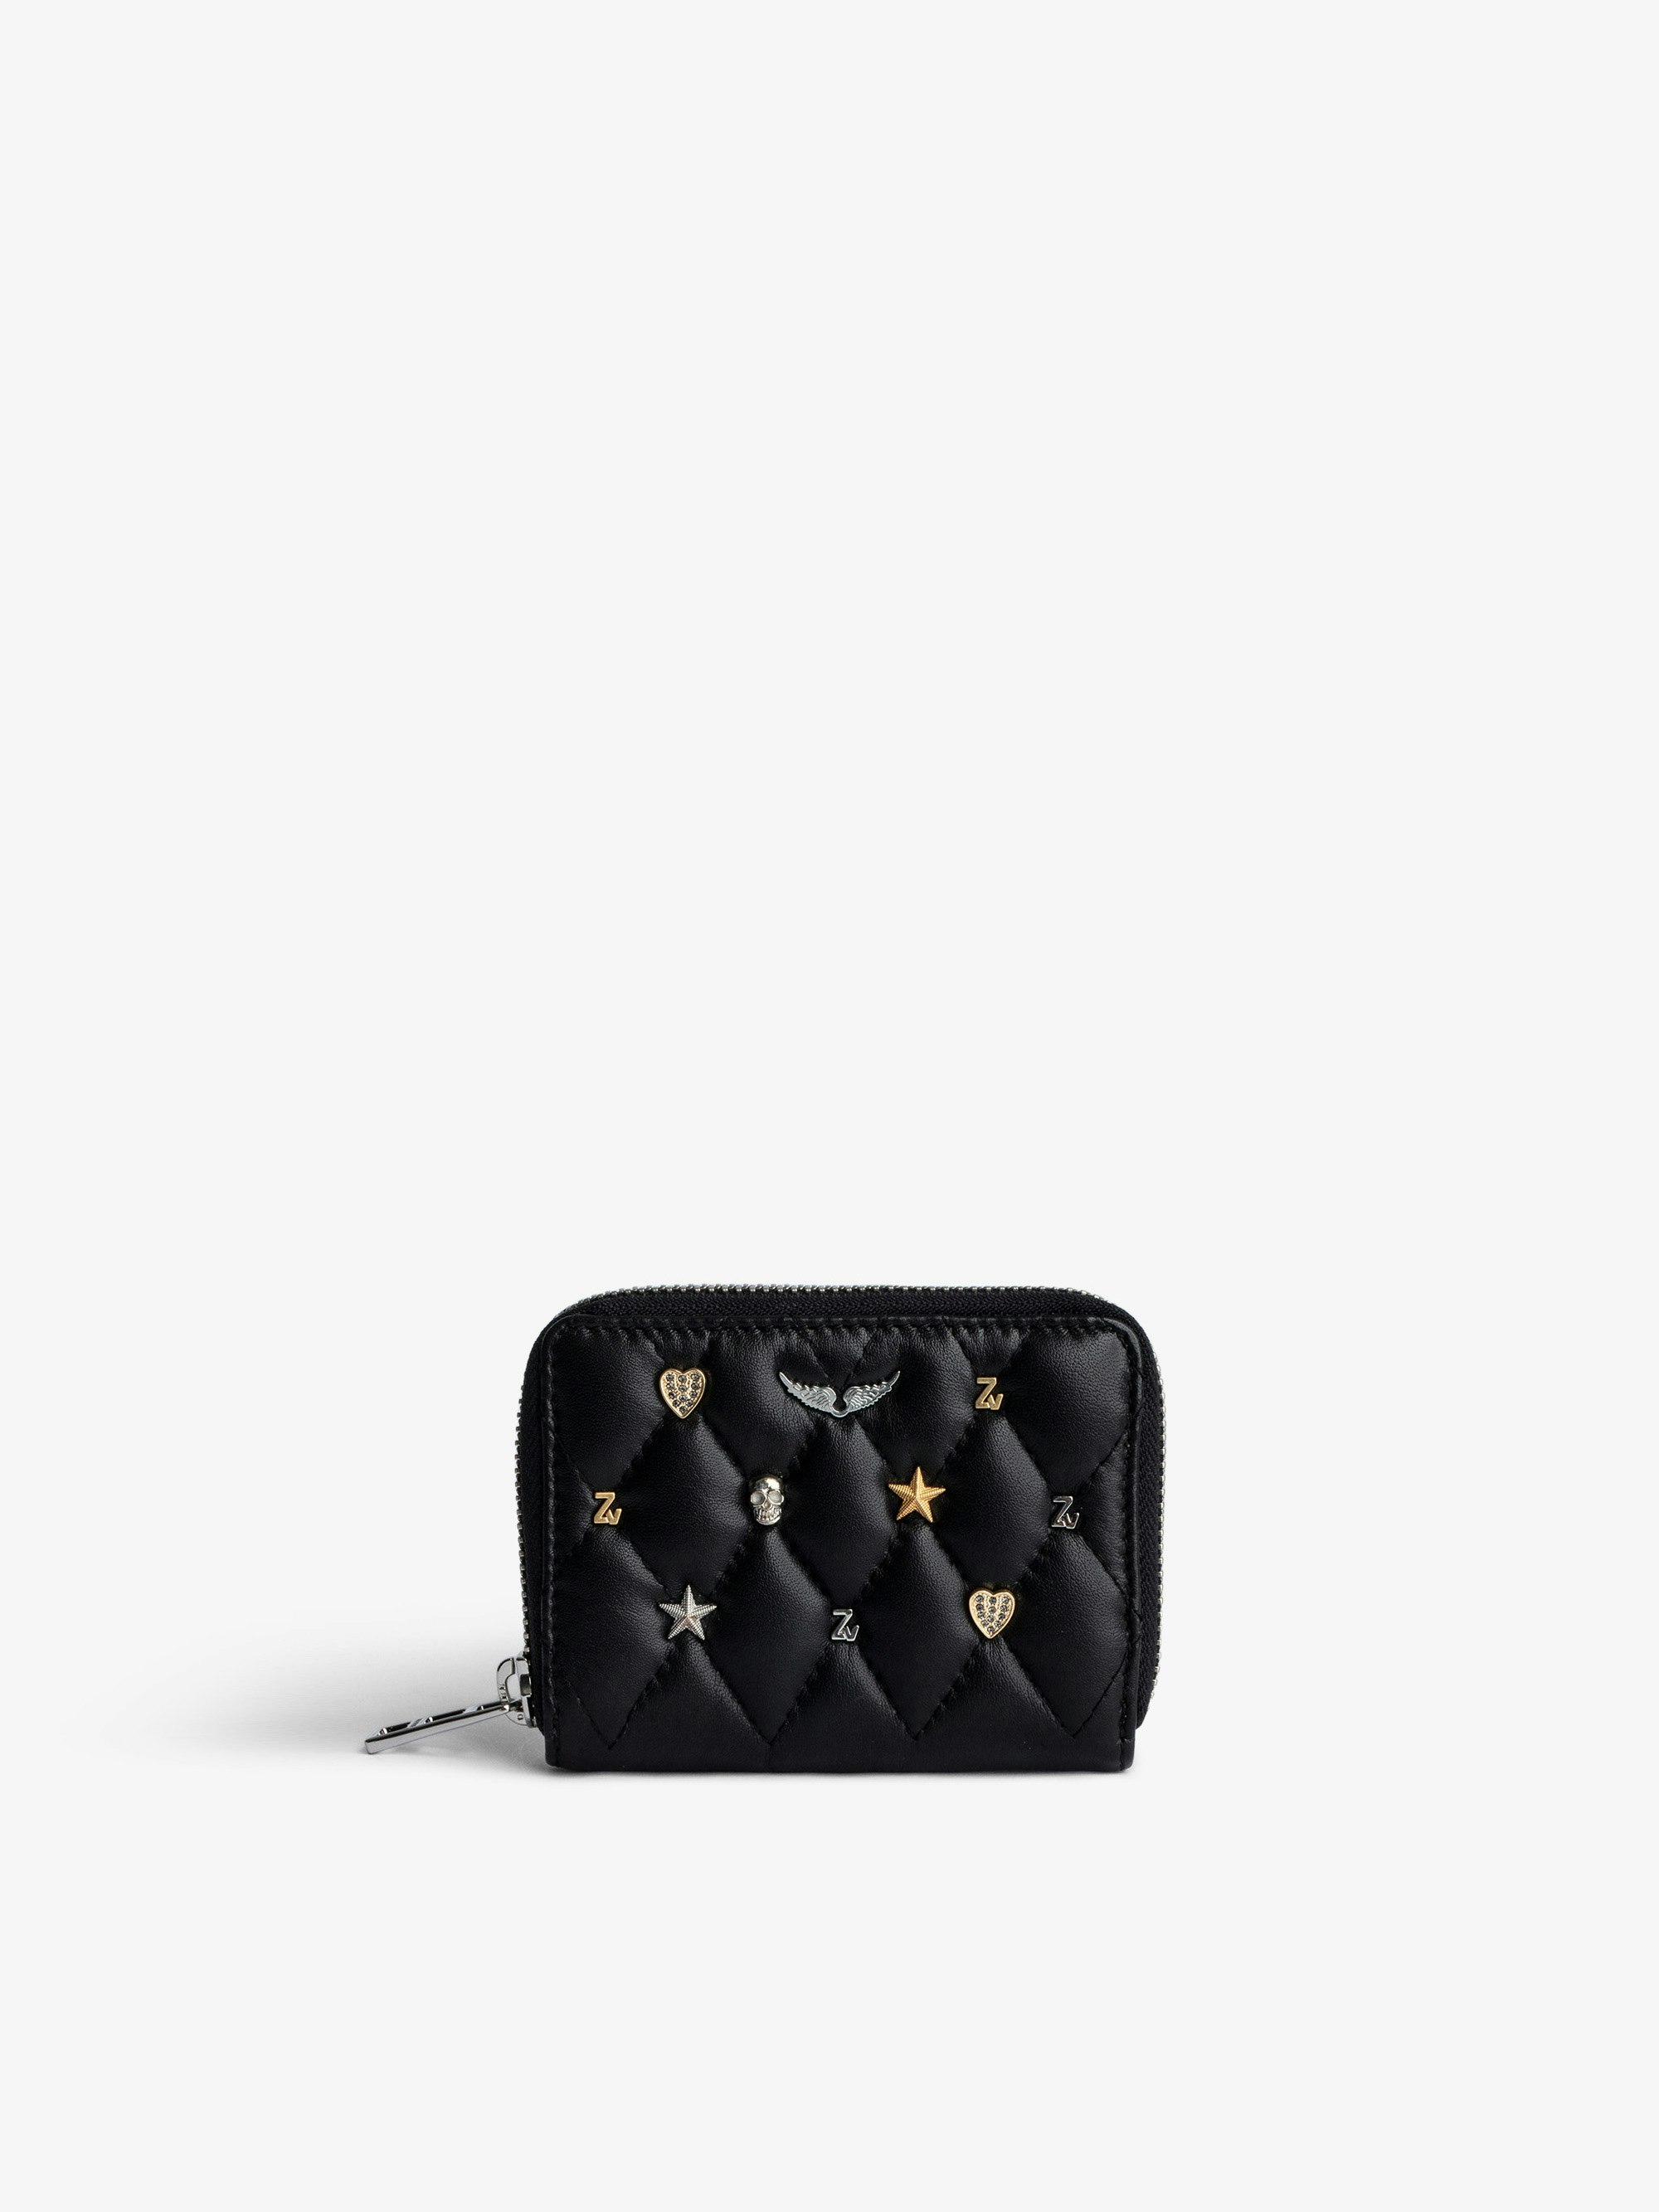 Mini ZV Coin Purse - Women’s black quilted leather coin purse with silver- and gold-tone charms.